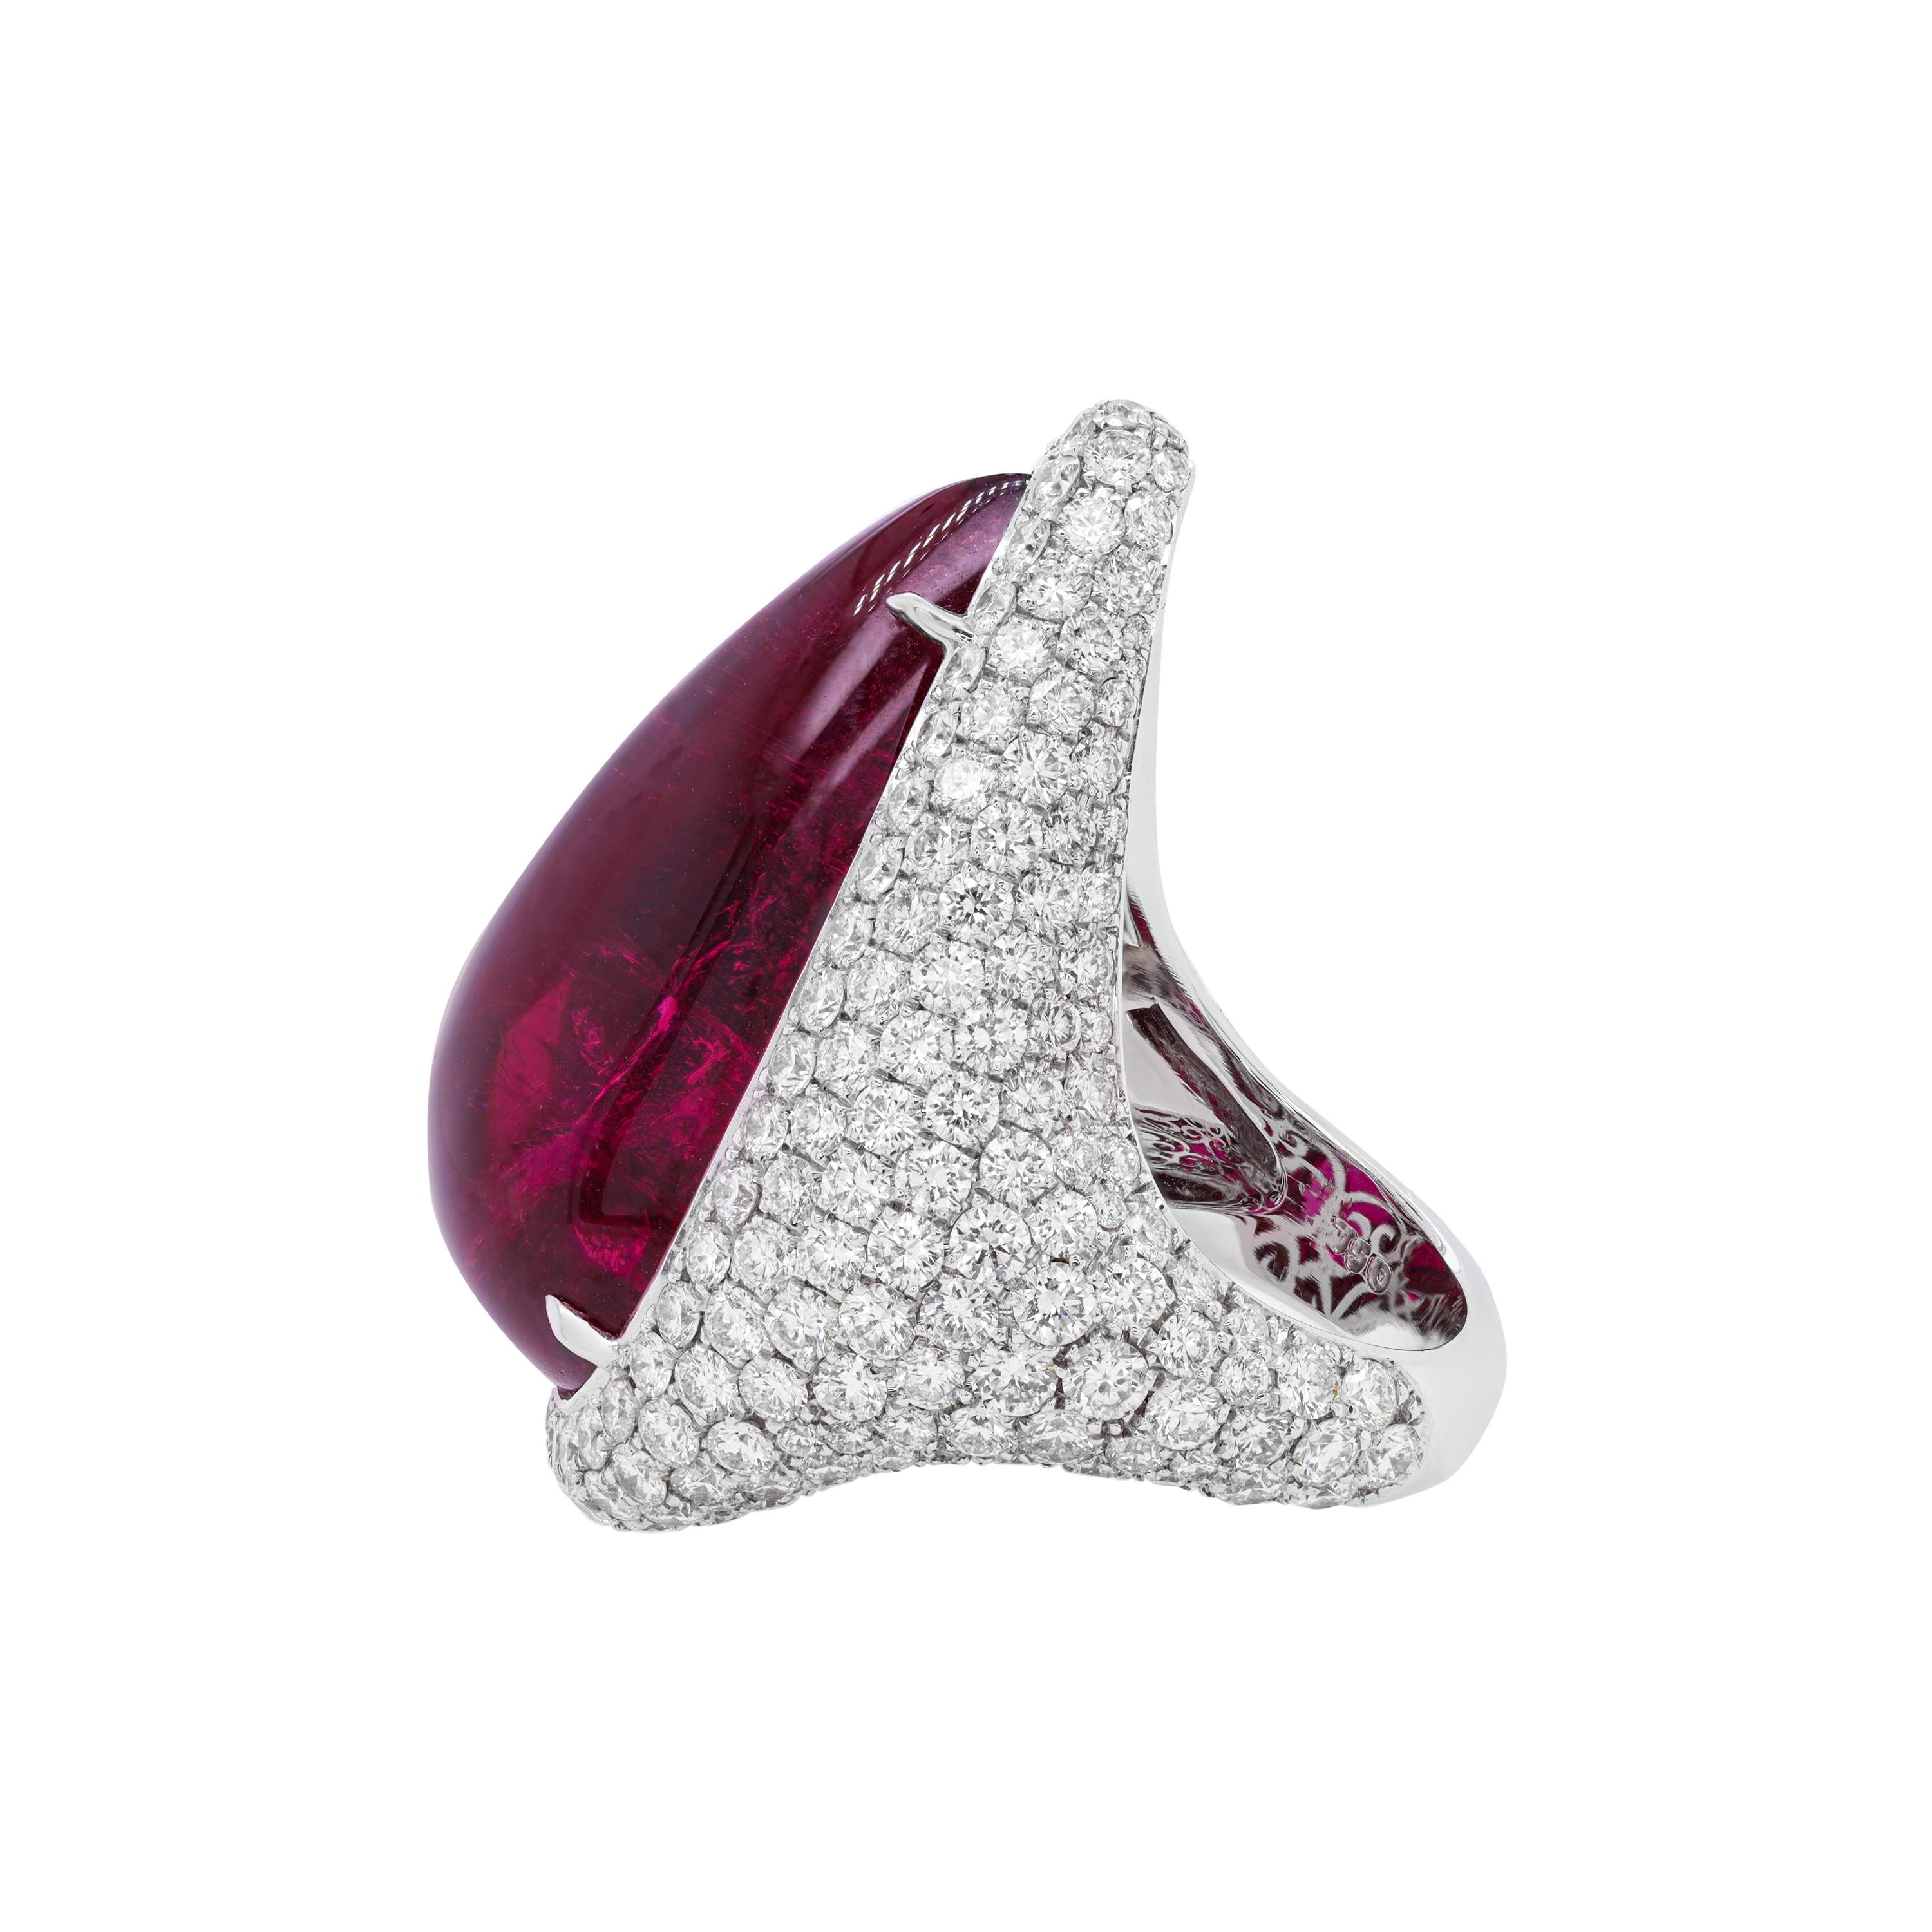 18kt White Gold Pink Tourmaline Cabochon Cut Diamond Ring, Features Gia Certified 36.08ct Pear Shape Pink (Purplish Red) Tourmaline And 6.50ct Of Micropave Round Diamonds Going Three-quarters Of The Way Around
